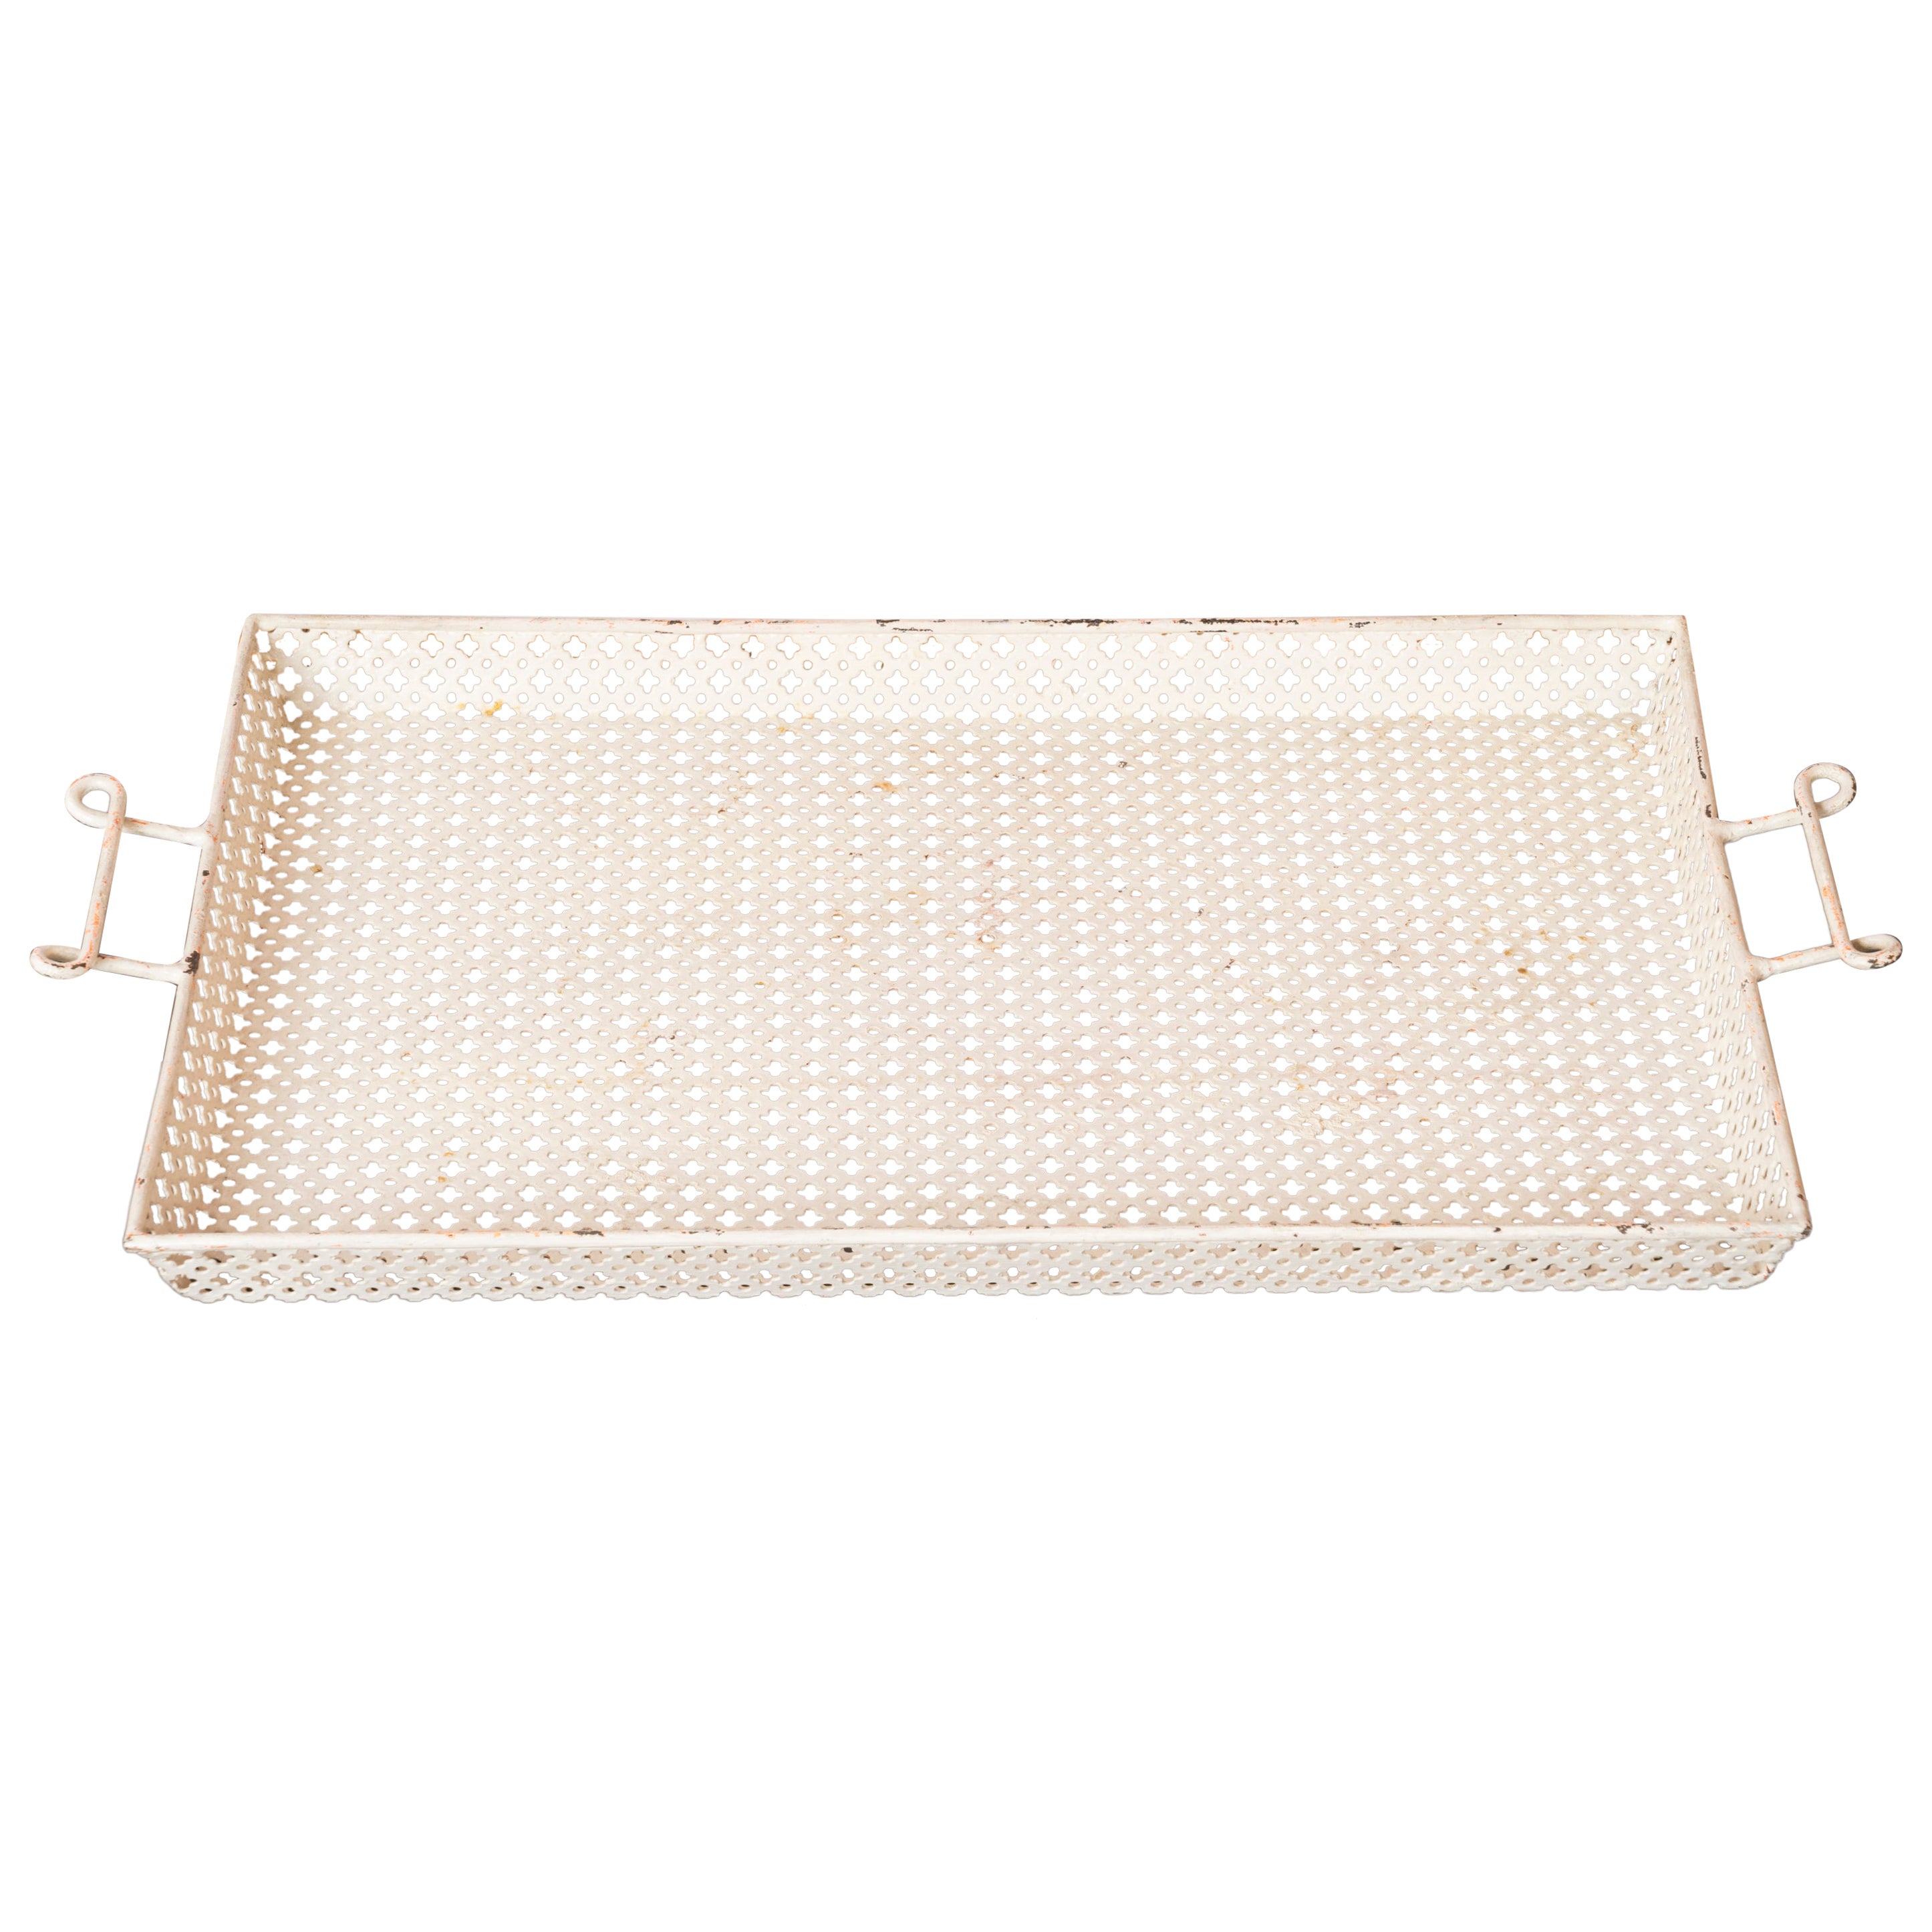 White "Rigitulle" Serving Tray by Mathieu Matégot - France 1960's For Sale